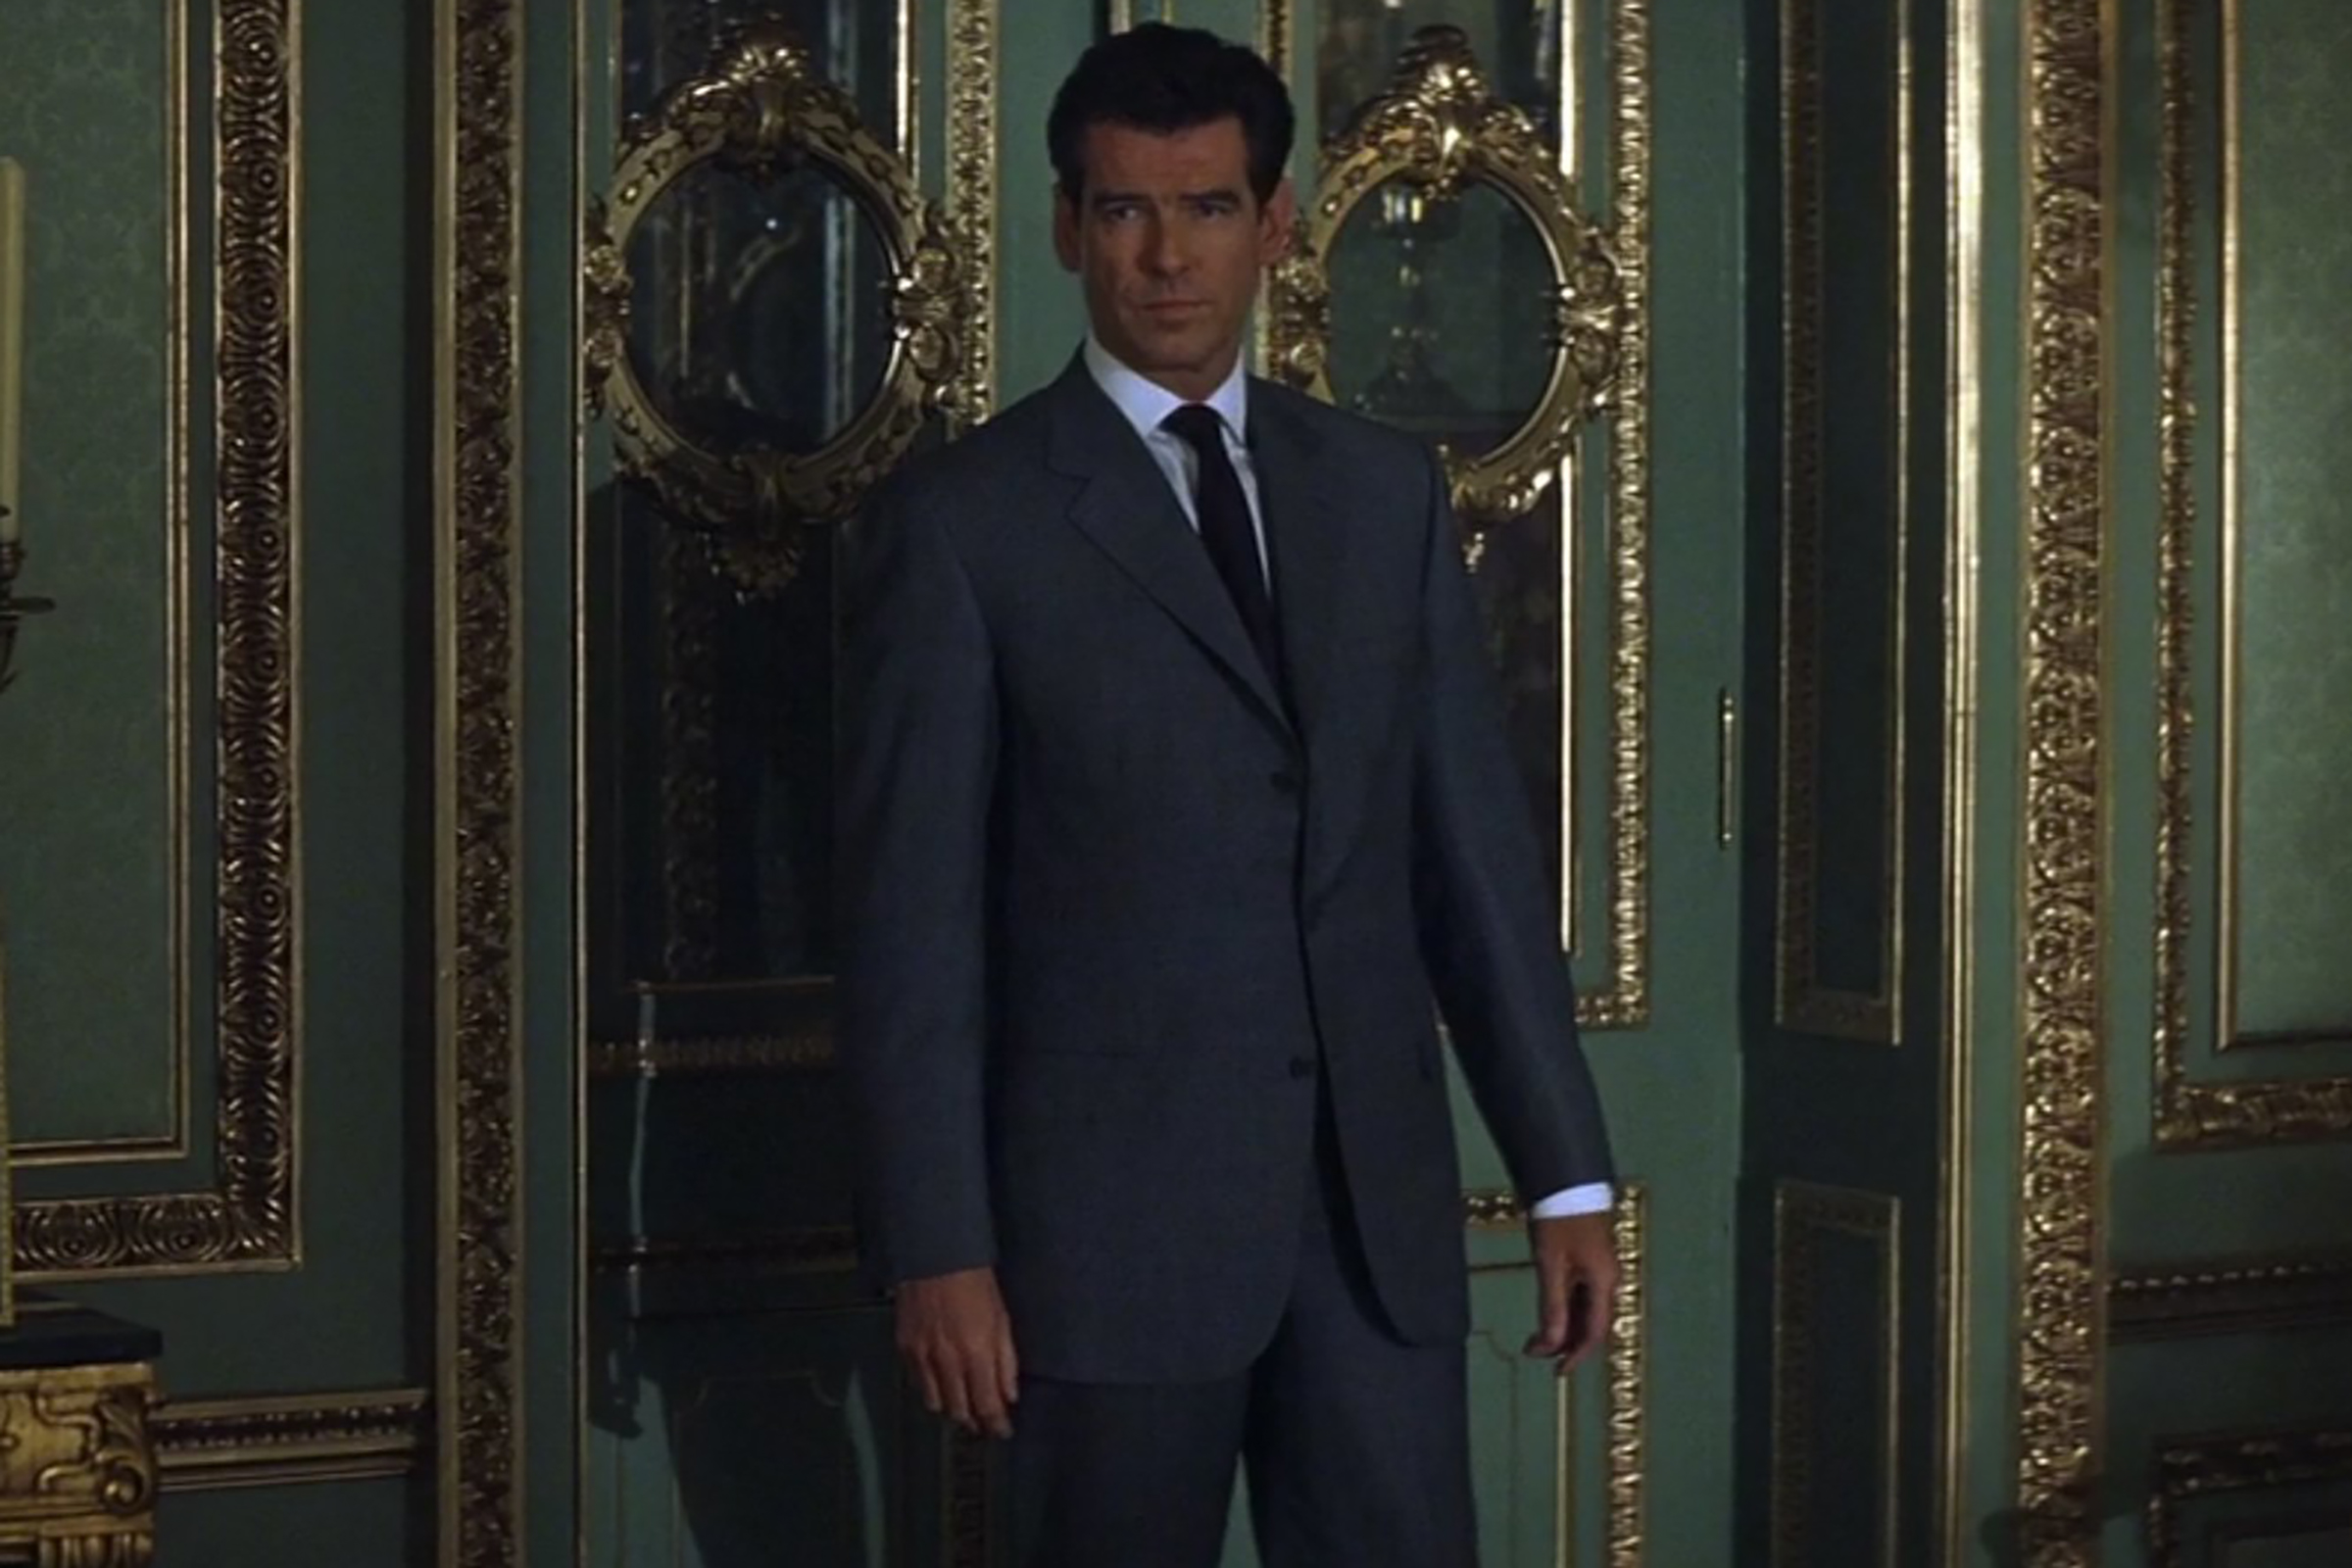 Pierce Brosnan wears a beautifully tailored suits from the Brioni house in The World is Not Enough.